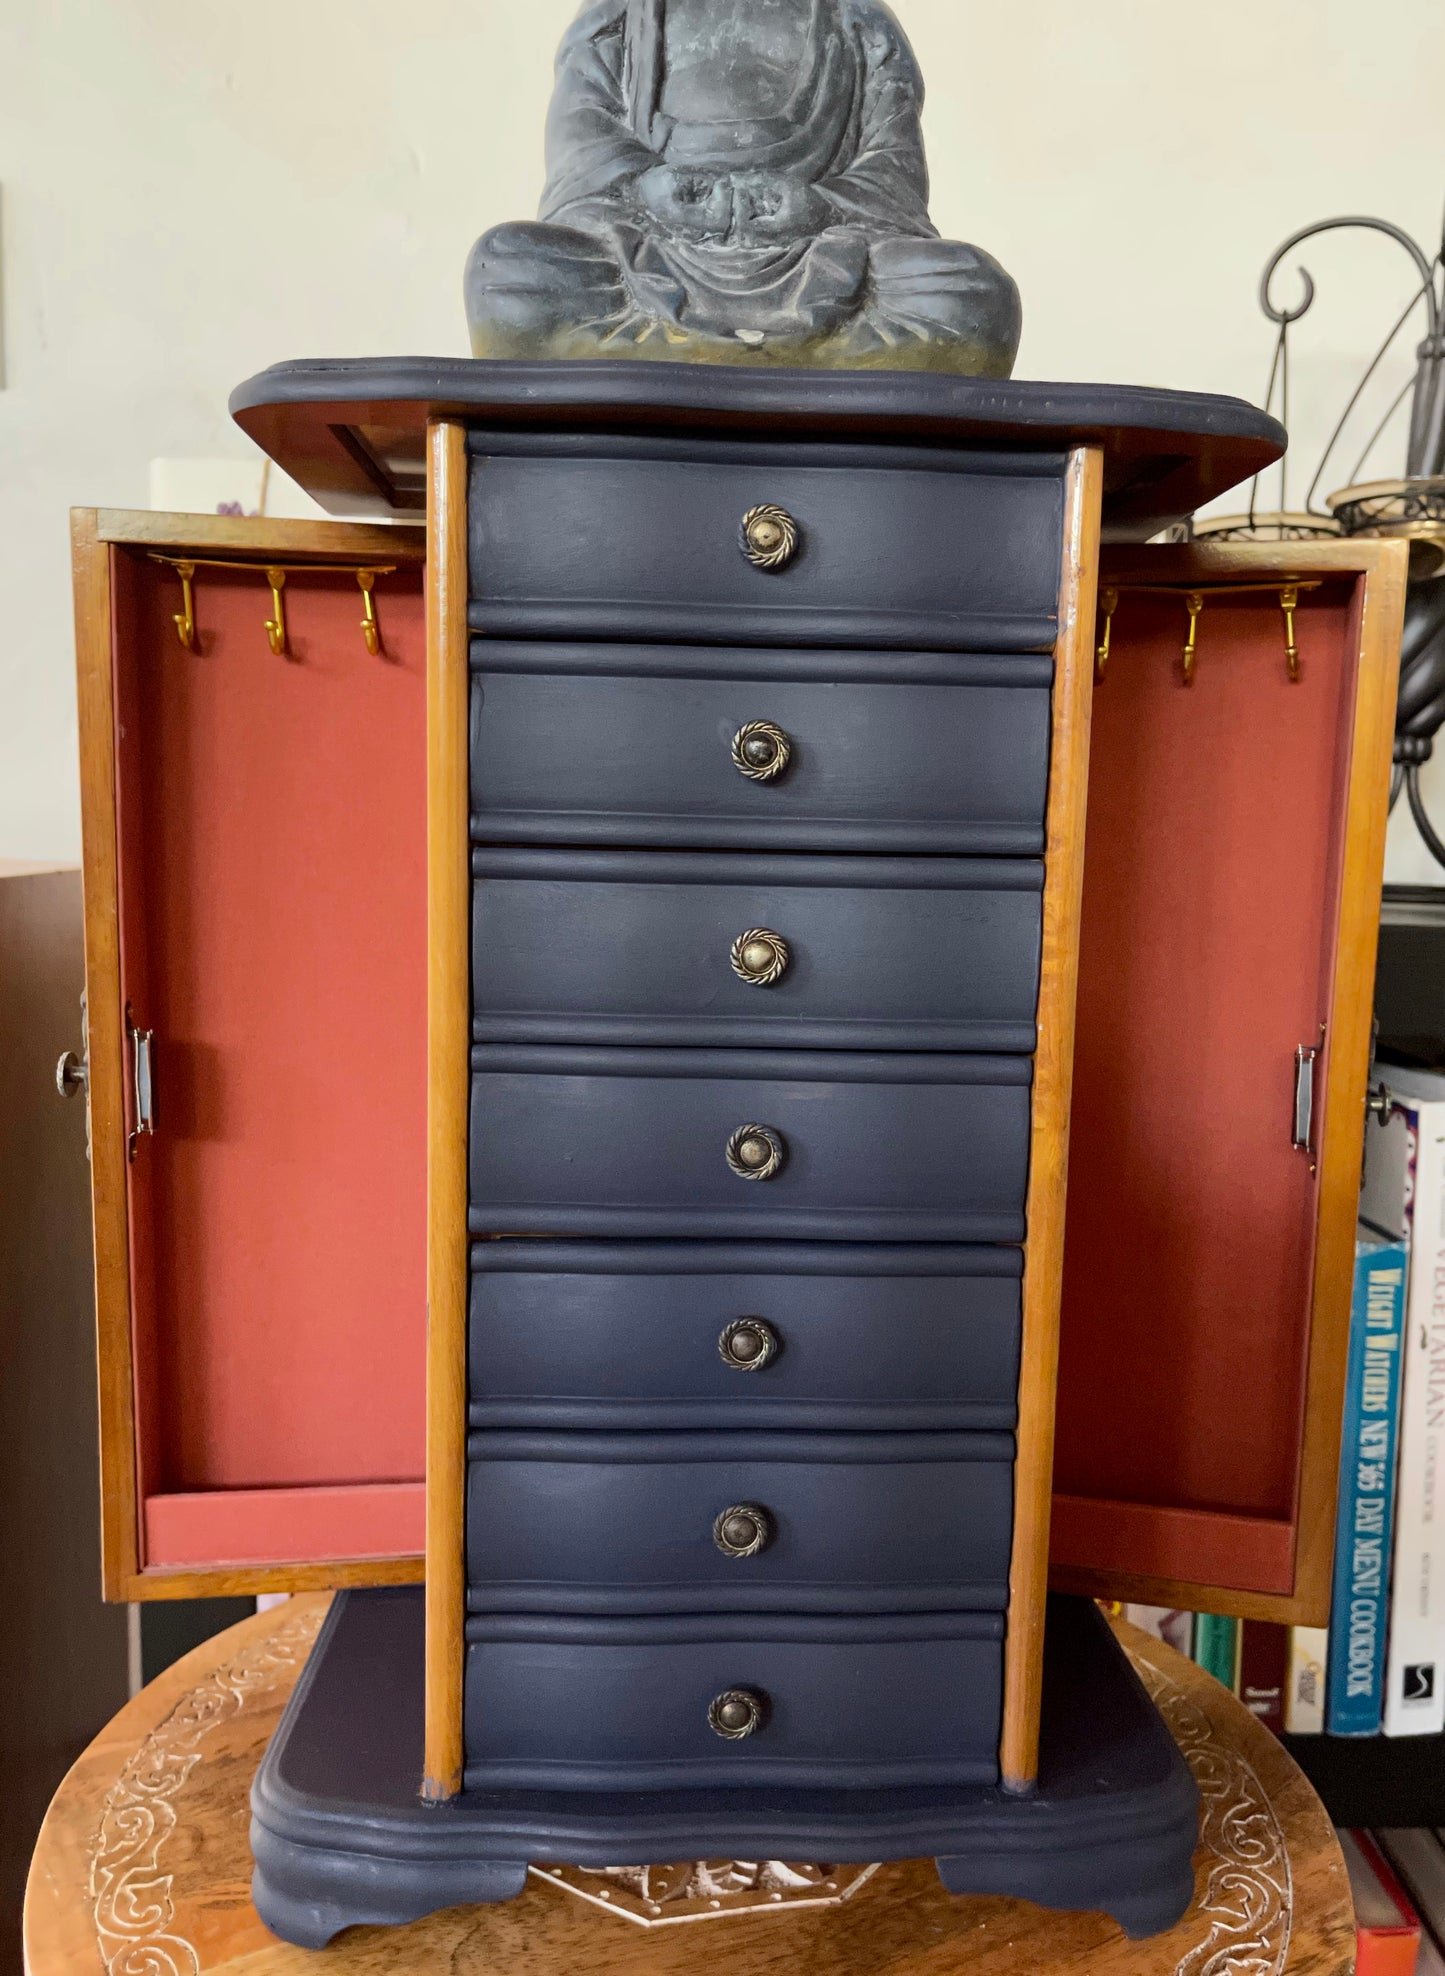 Lovecycled Vintage Jewelry Chest, His Hers Jewelry Cabinet